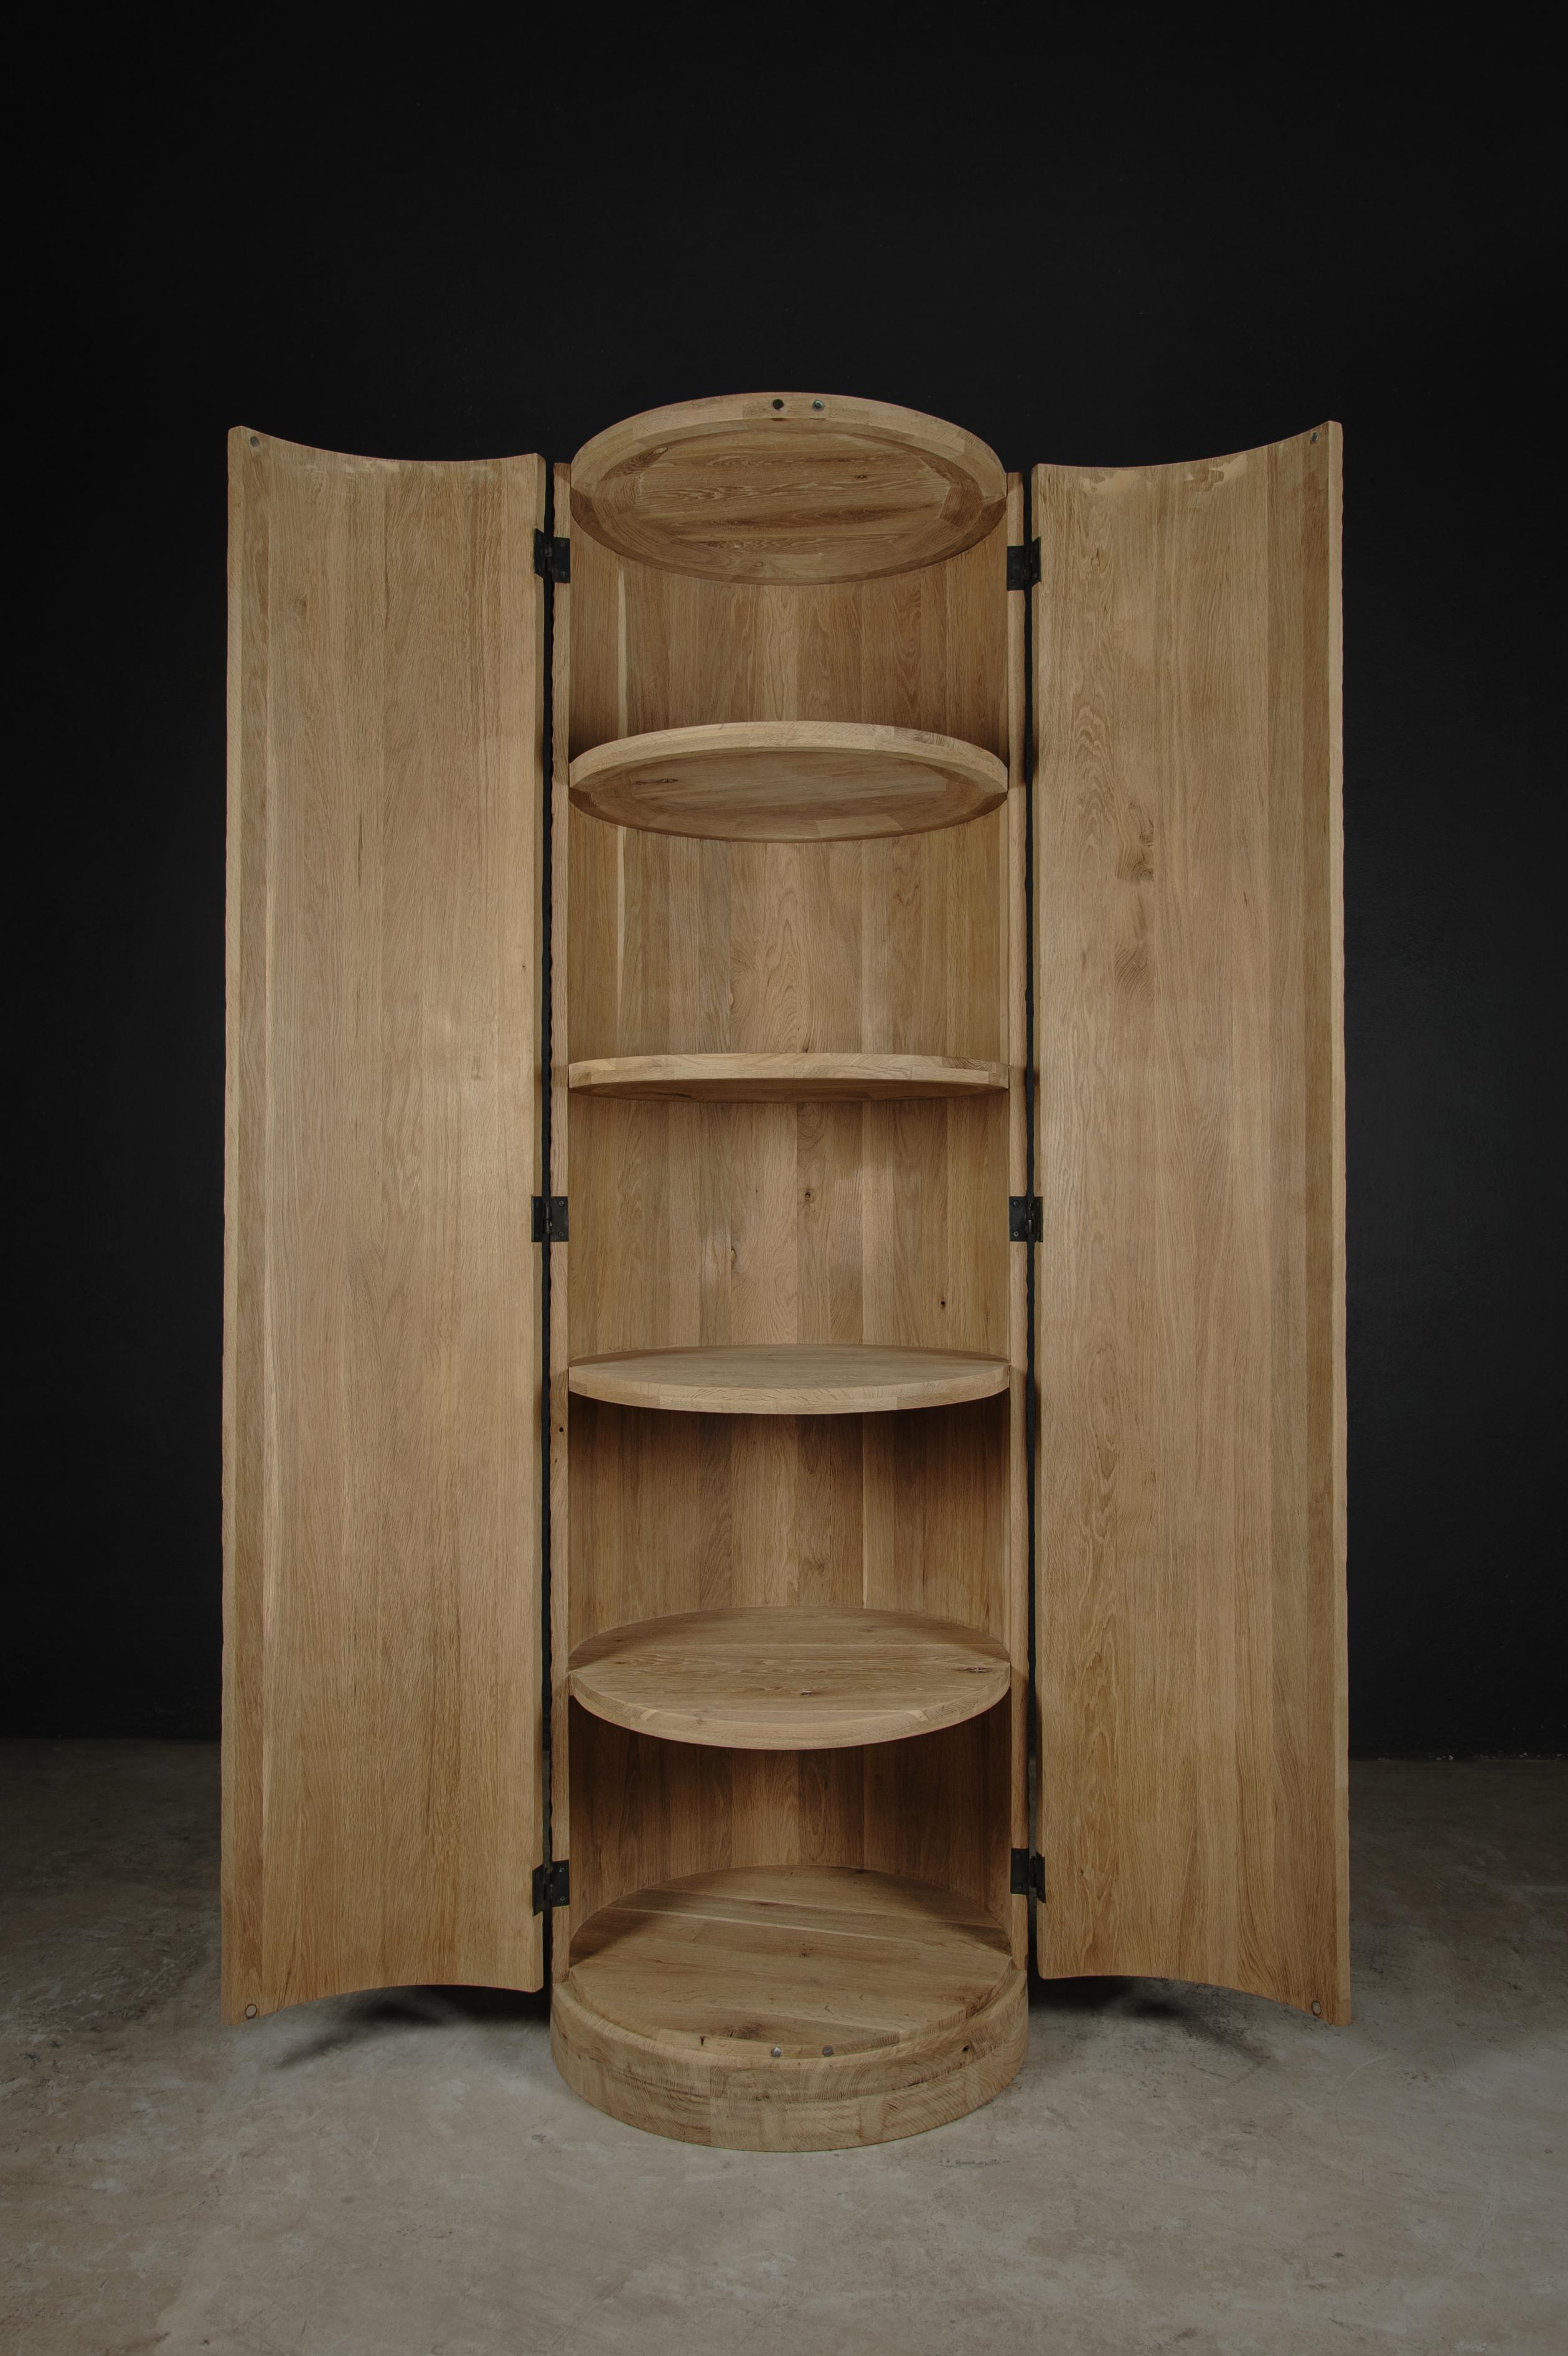 Contemporary Brutalist Column Cupboard made of solid oak

Dimensions: 
Height: 182 cm
Diameter: 55 xm

Unique piece made to order. Customizable.

Founded by Denis Milovanov, SÓHA design studio conceives and produces furniture design and decorative